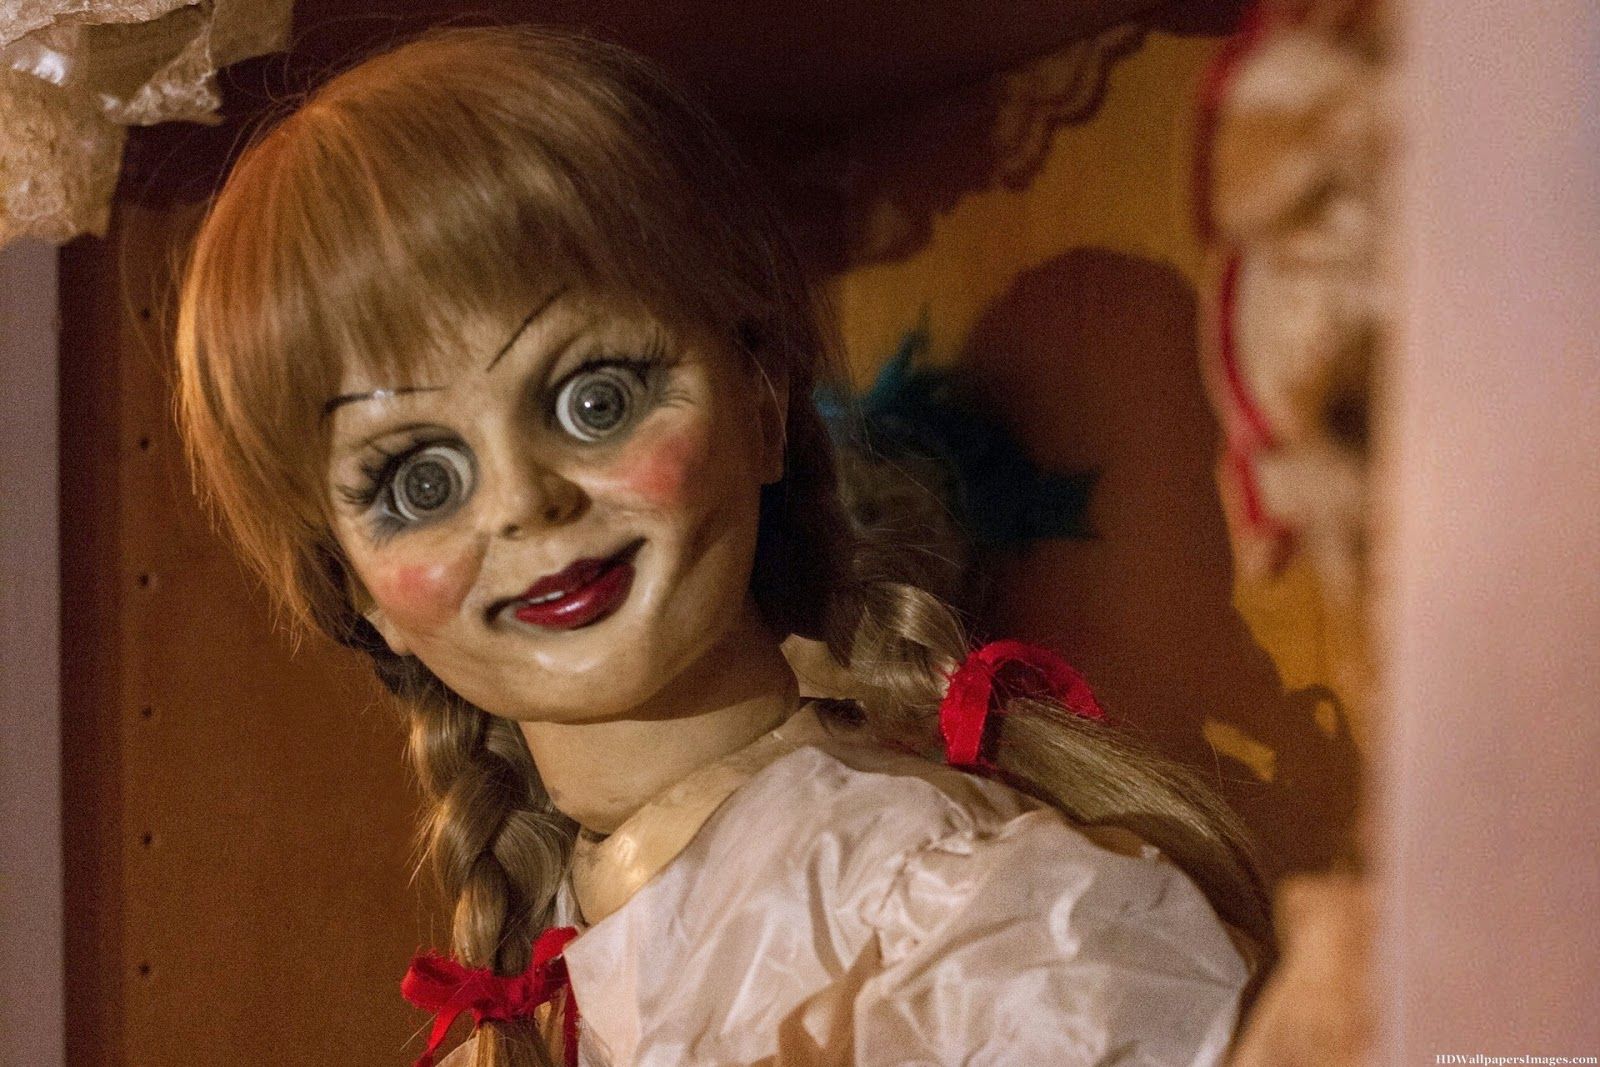 Third Installment of the Annabelle Franchise Coming Soon